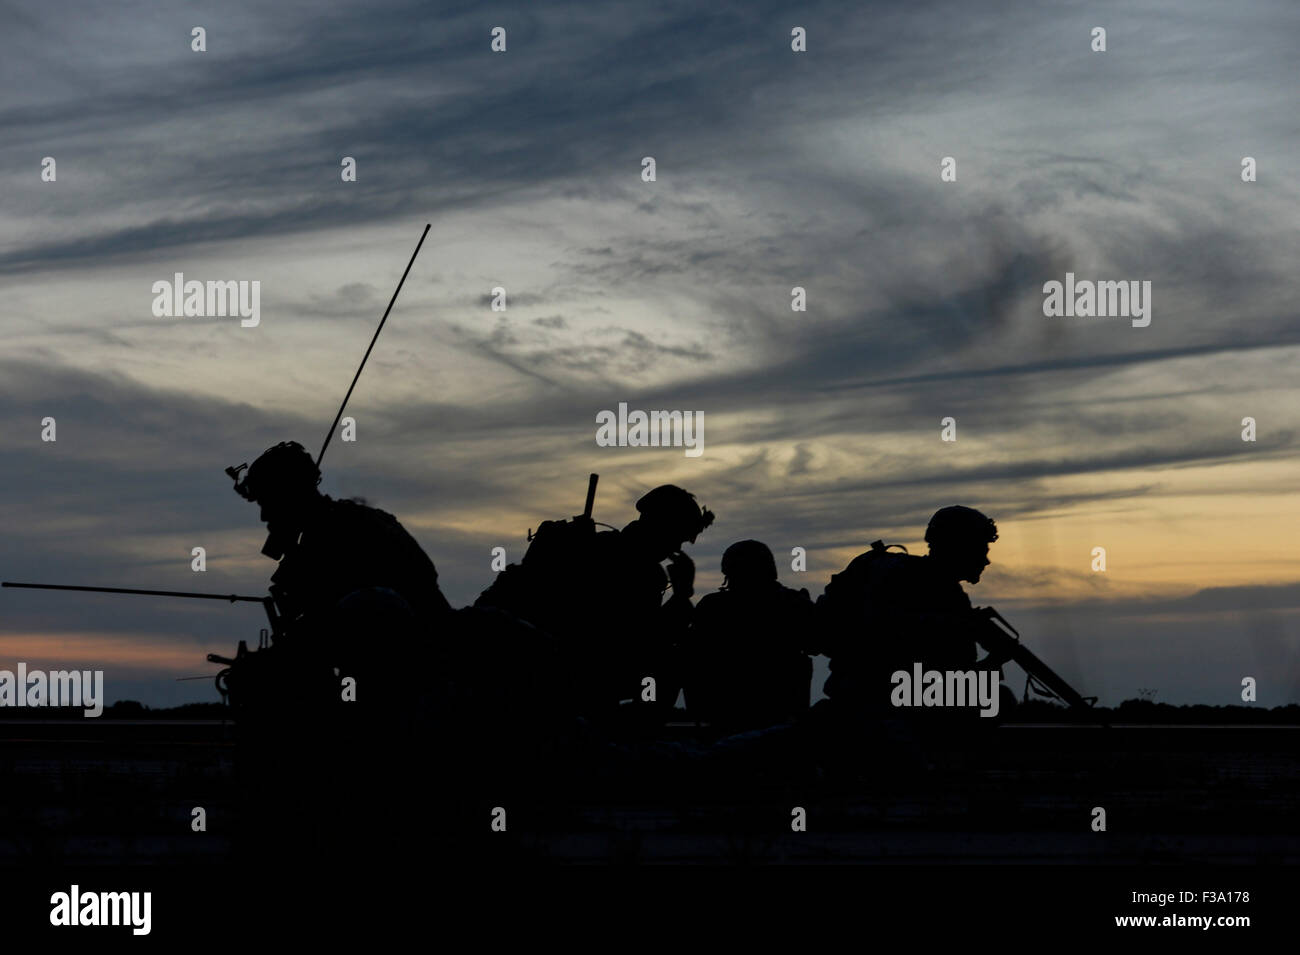 April 22, 2015 - U.S. Marine Corps air traffic controllers with the Marine Air Control Squadron 1 and Army air traffic controlle Stock Photo